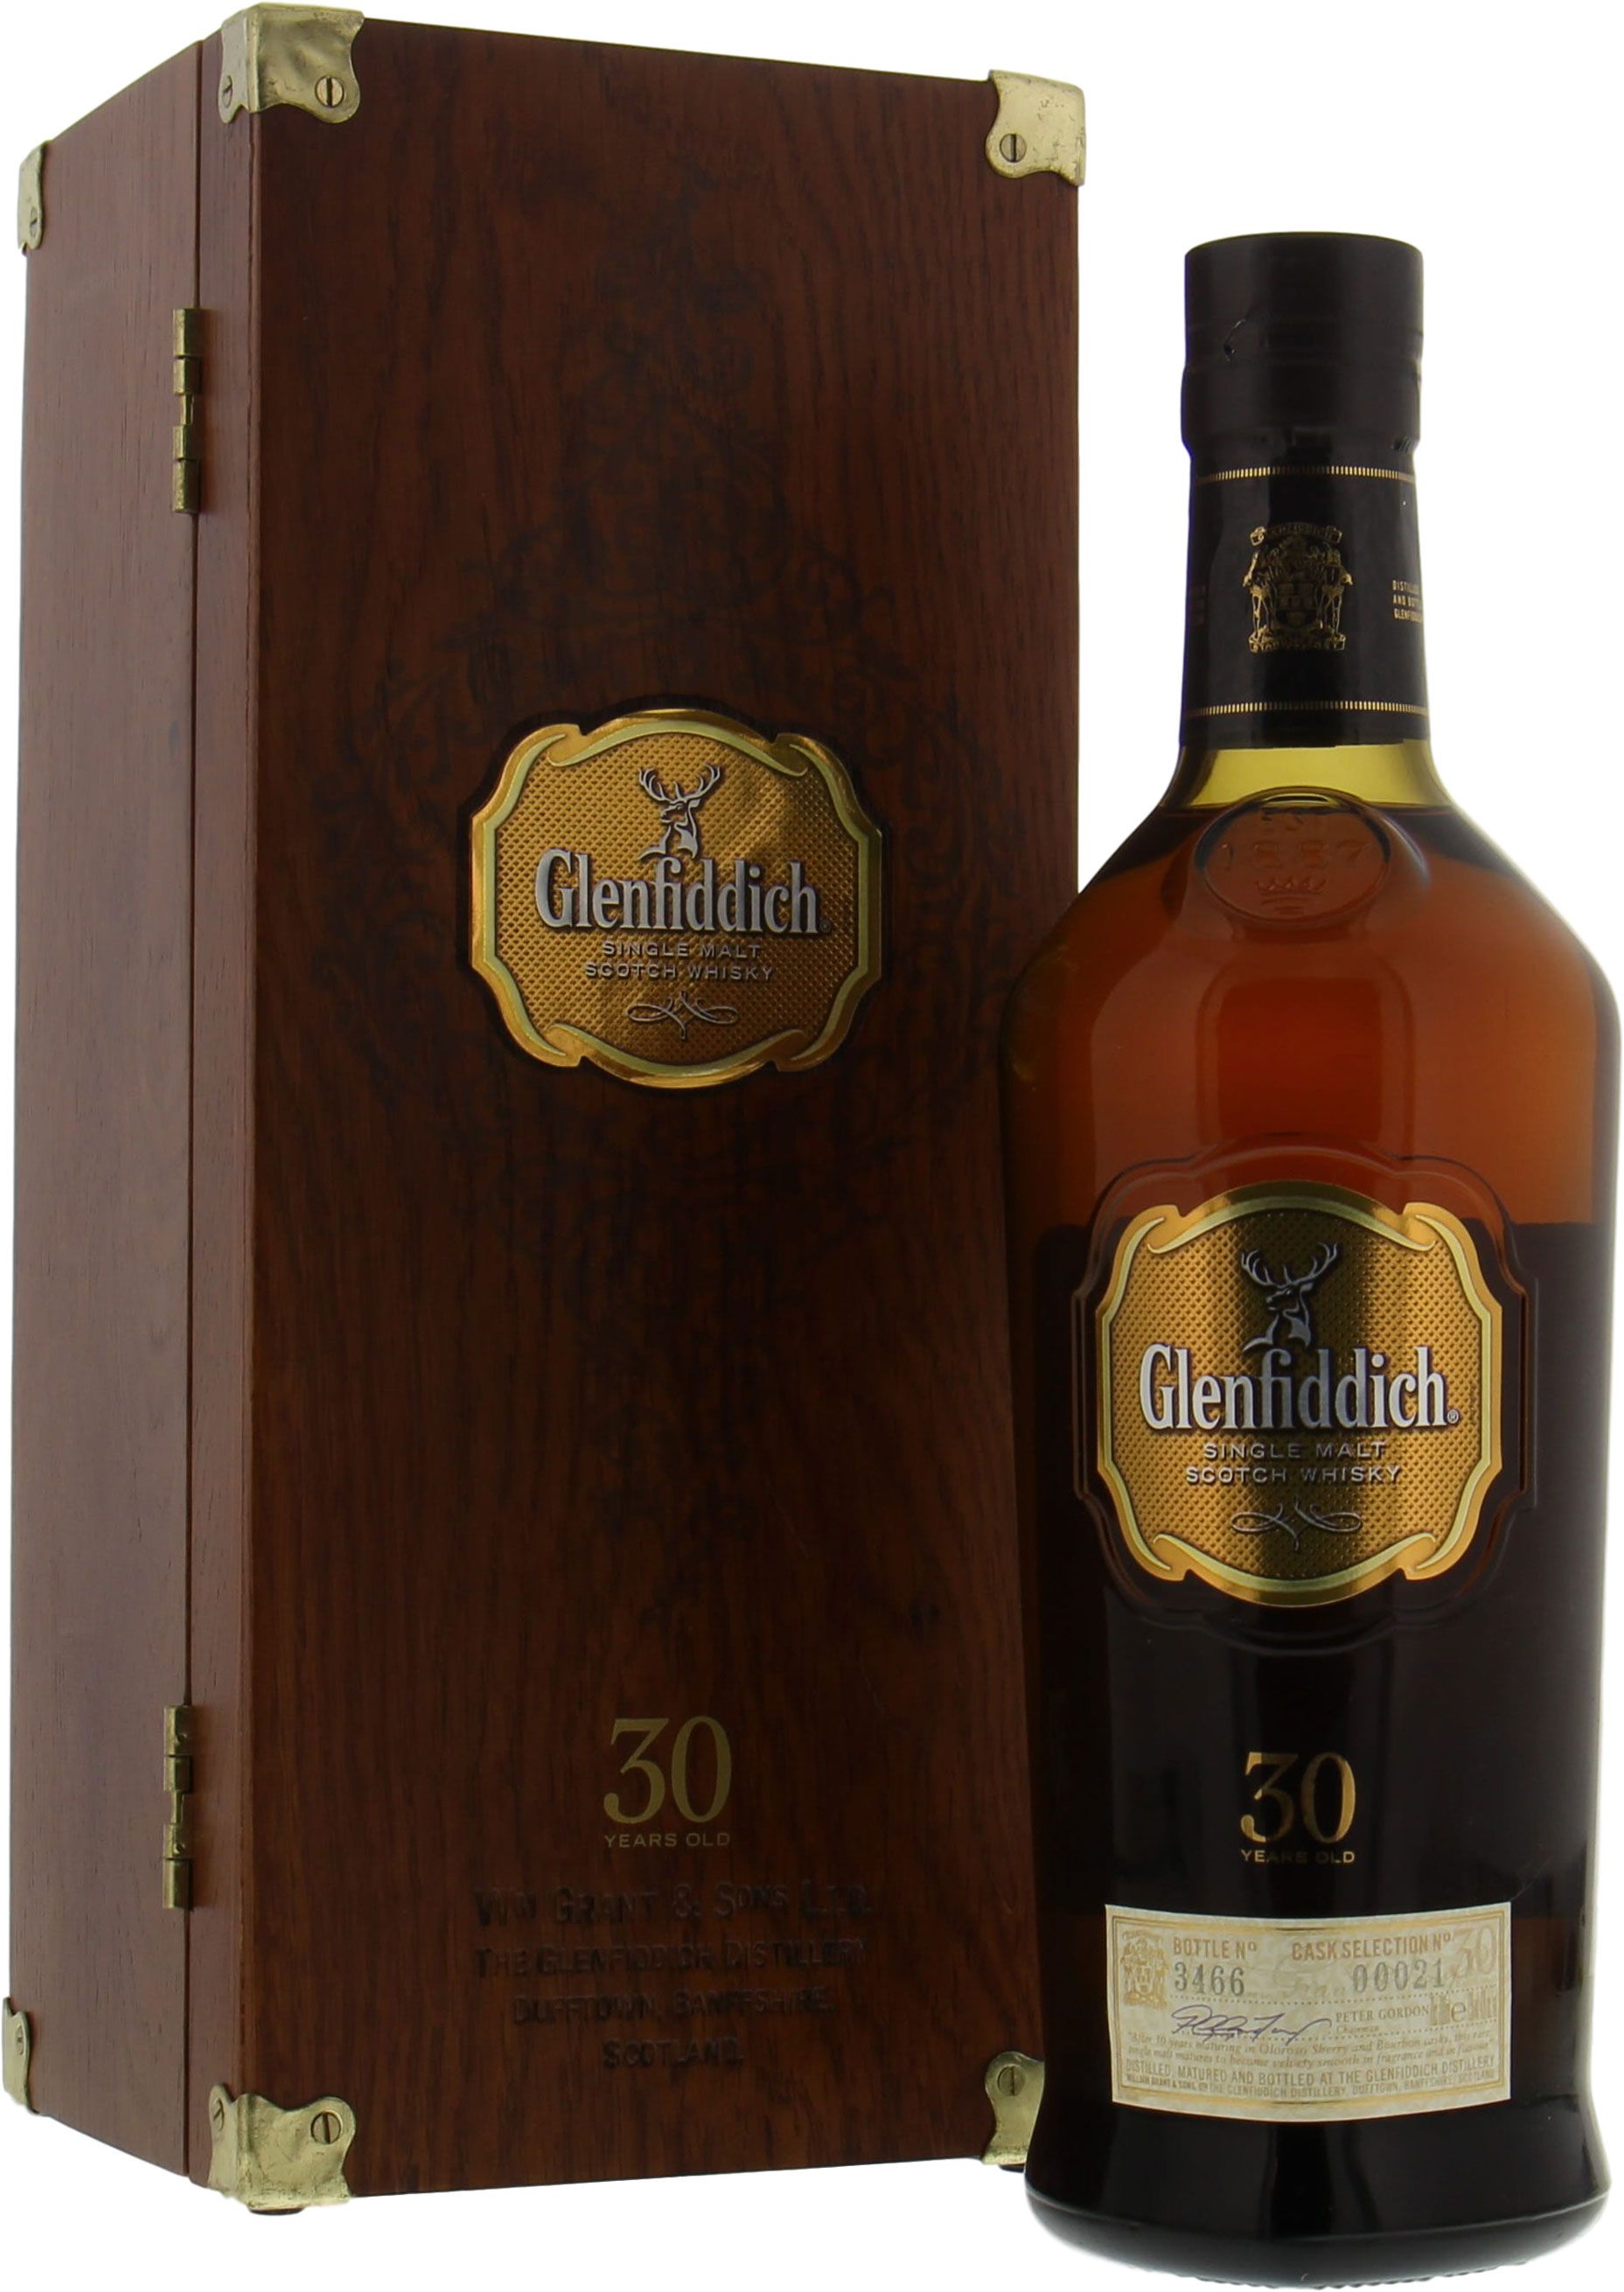 Glenfiddich - 30 Years Old  Cask Selection:00021 43% NV In Original Container